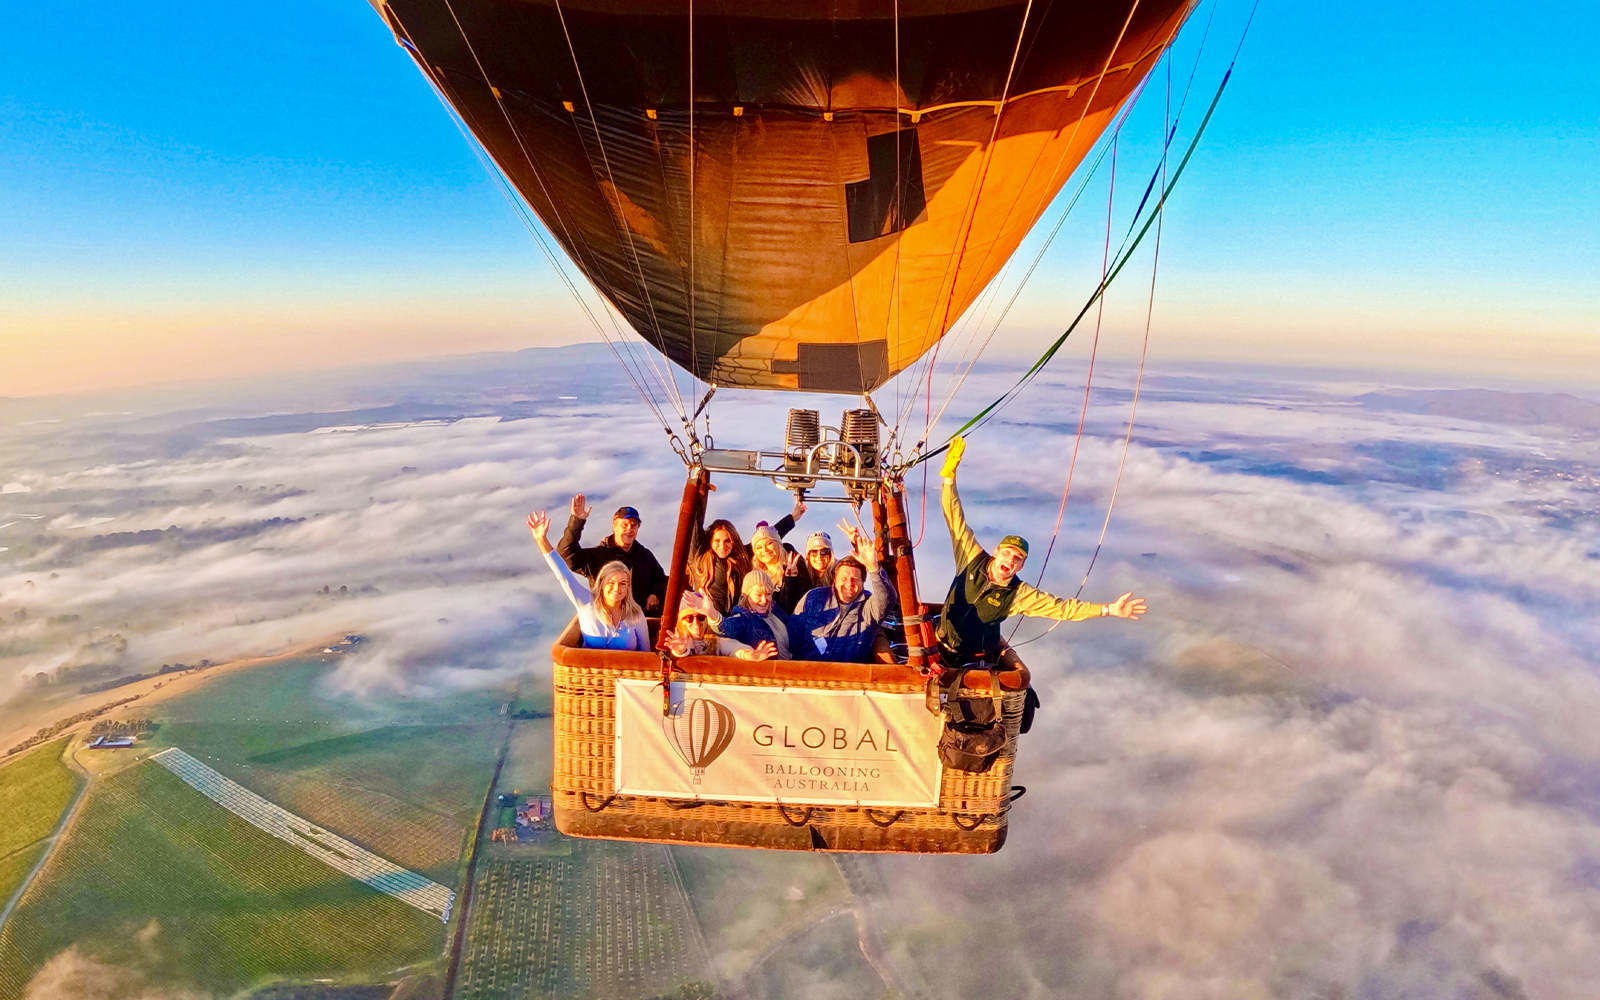 Image of Sunrise Hot Air Balloon Flight Over the Yarra Valley